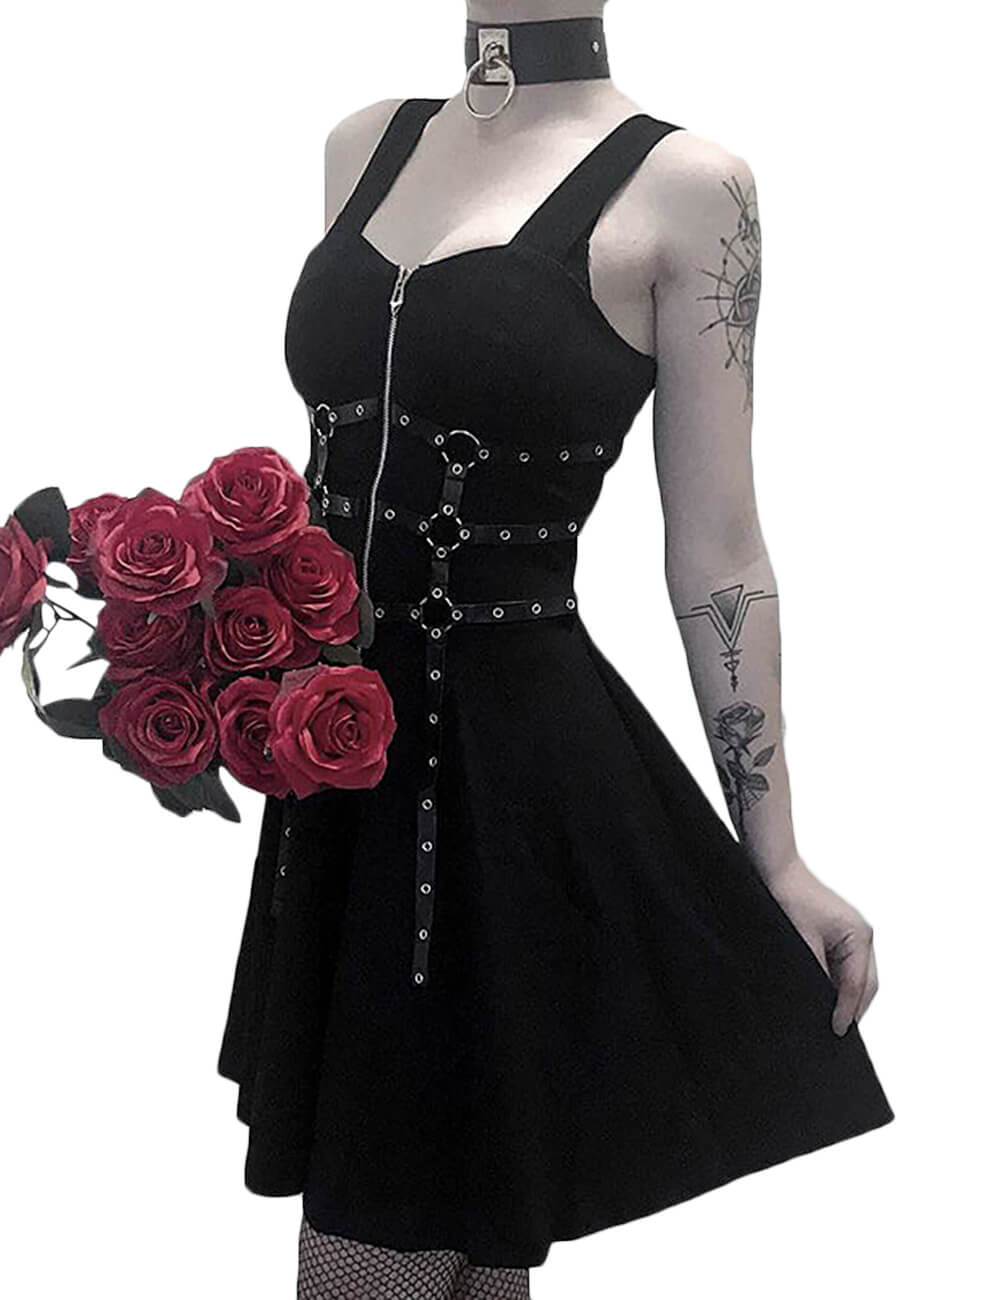 Cool Black Backless Zipper Up Pleated Harness Goth Strap Dresses Leather Whipped Gothic Punk Dress